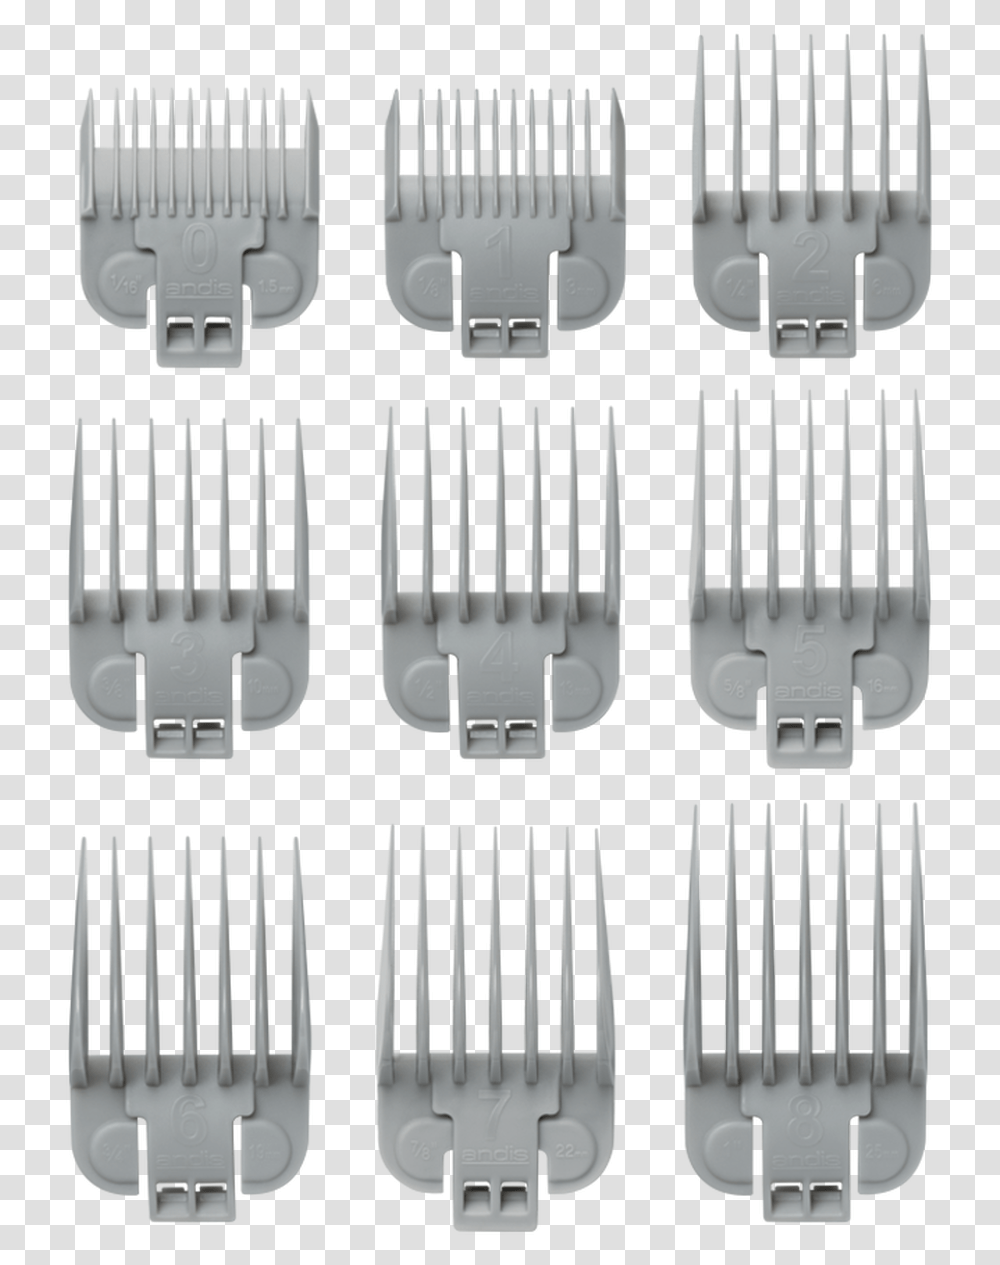 Andis Us 1 Envy Guard Set 11pc Andis Envy Clippers Blades, Tool, Comb, Steamer, Electronics Transparent Png